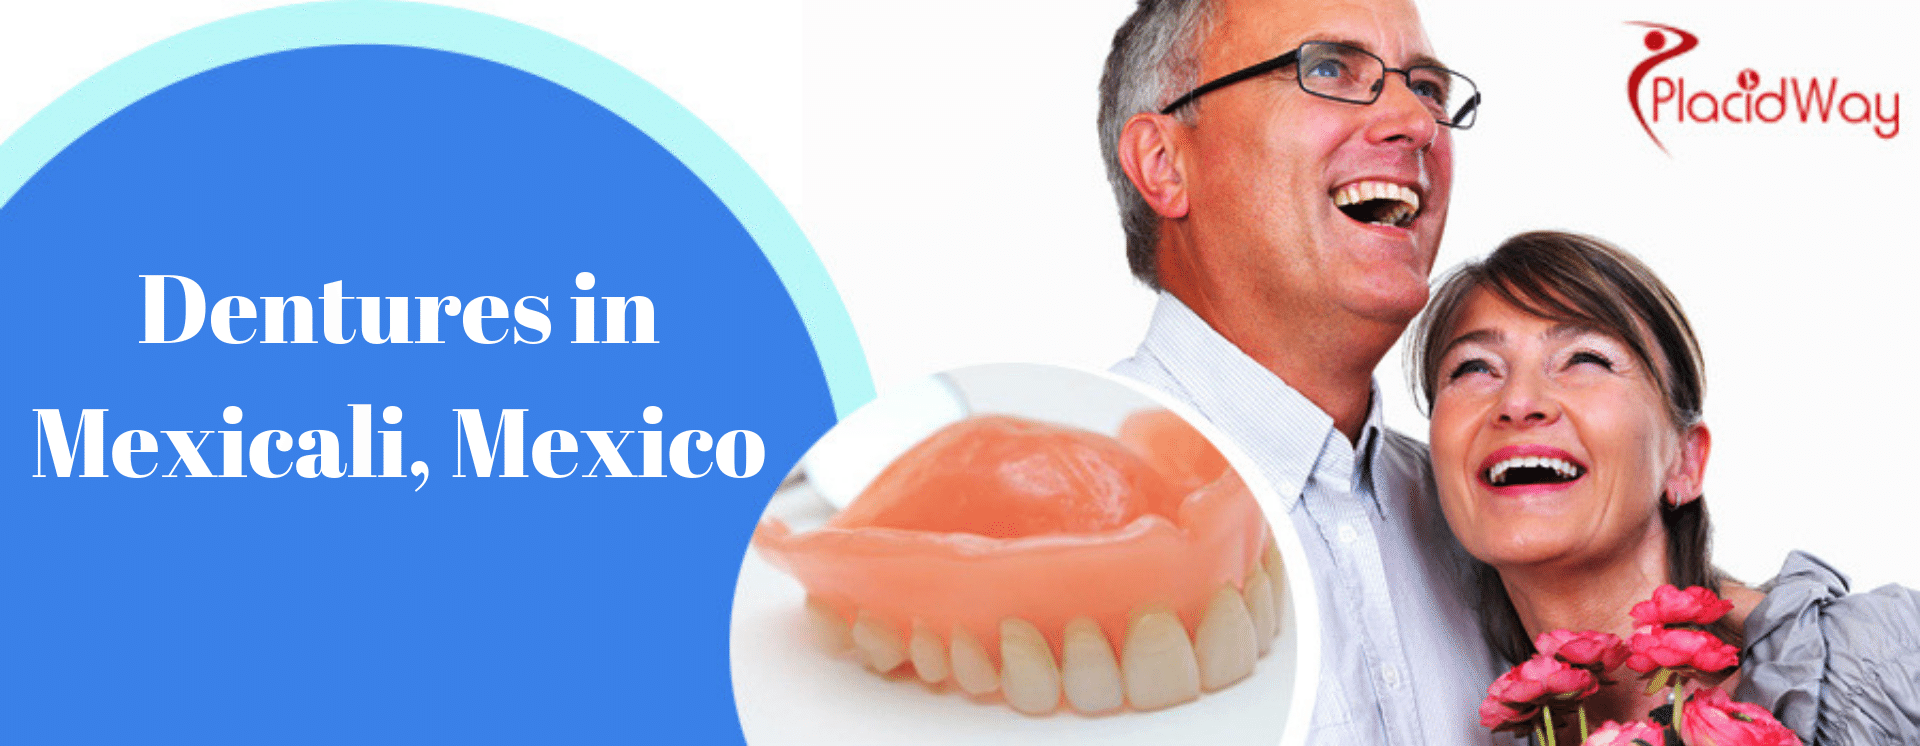 Dentures-in-Mexicali-Mexico